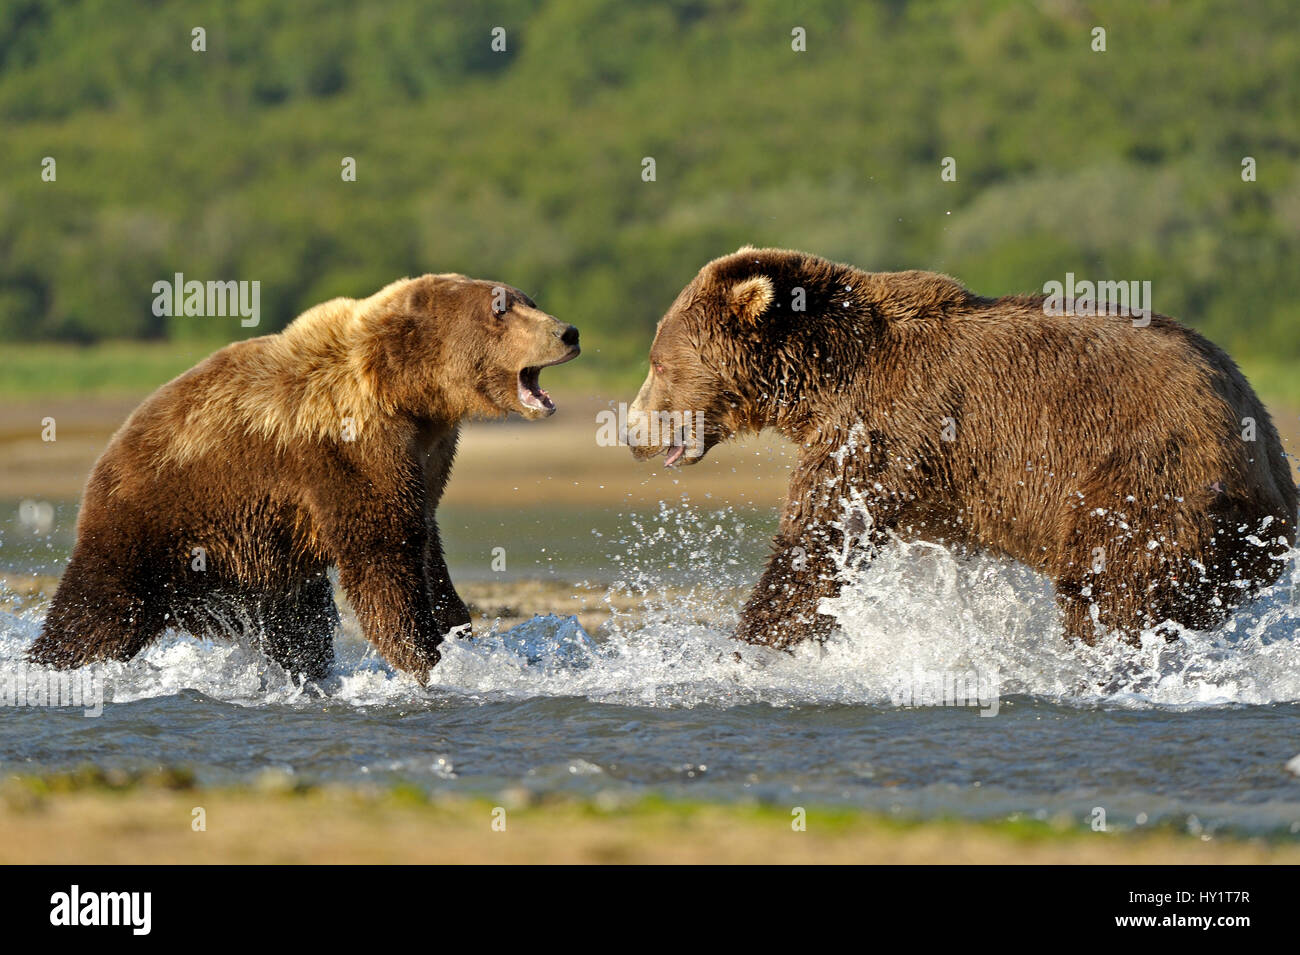 Grizzly Bear (Ursus arctos horribilis) male (right) and female fighting in water over salmon. Katmai, Alaska, USA, August. Stock Photo